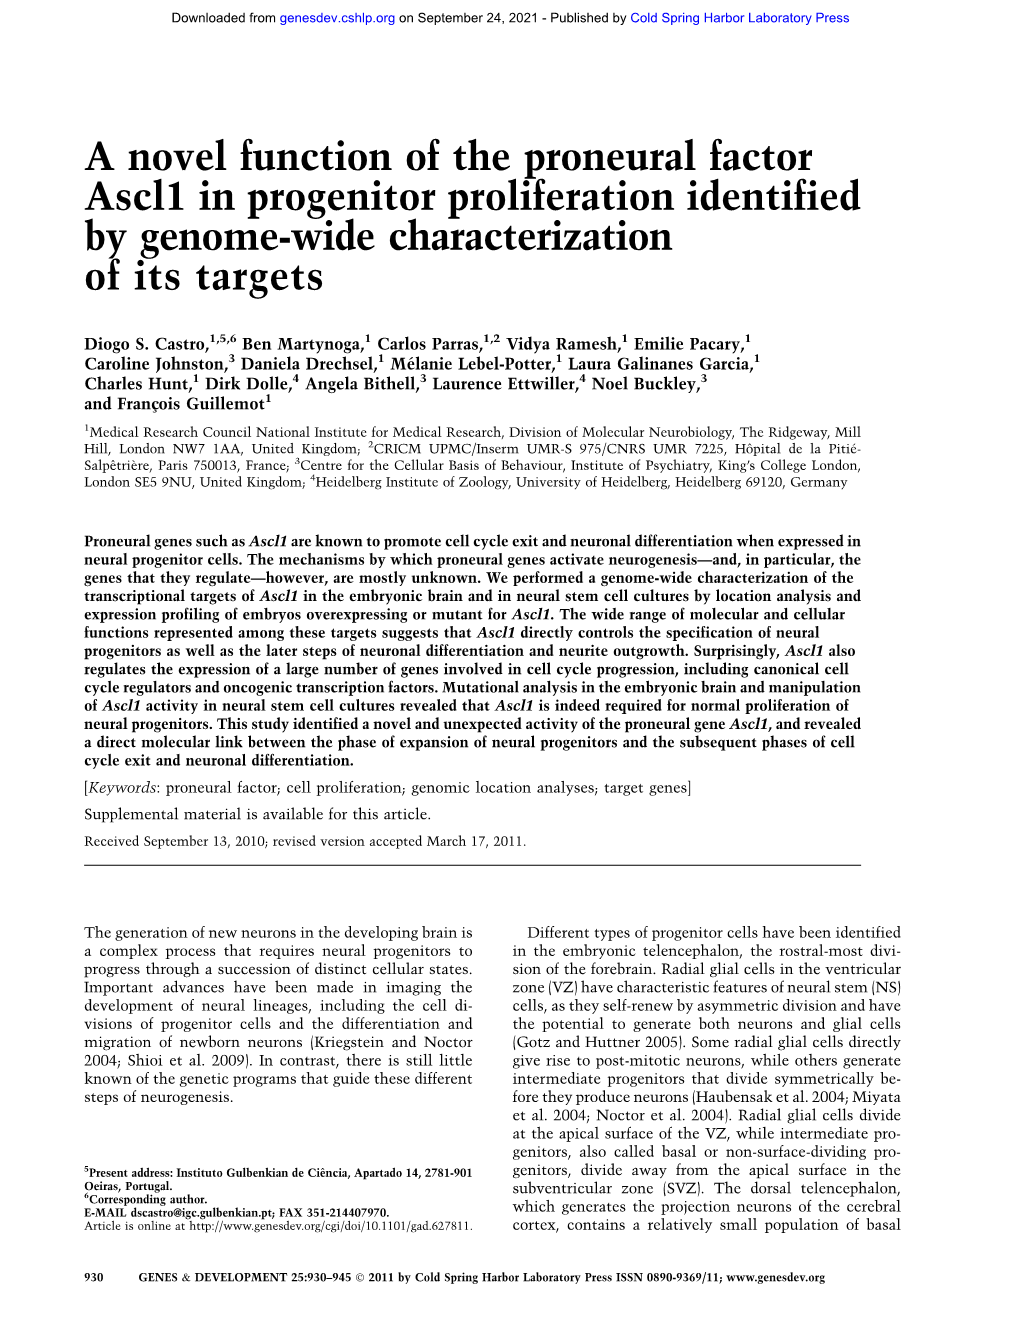 A Novel Function of the Proneural Factor Ascl1 in Progenitor Proliferation Identified by Genome-Wide Characterization of Its Targets